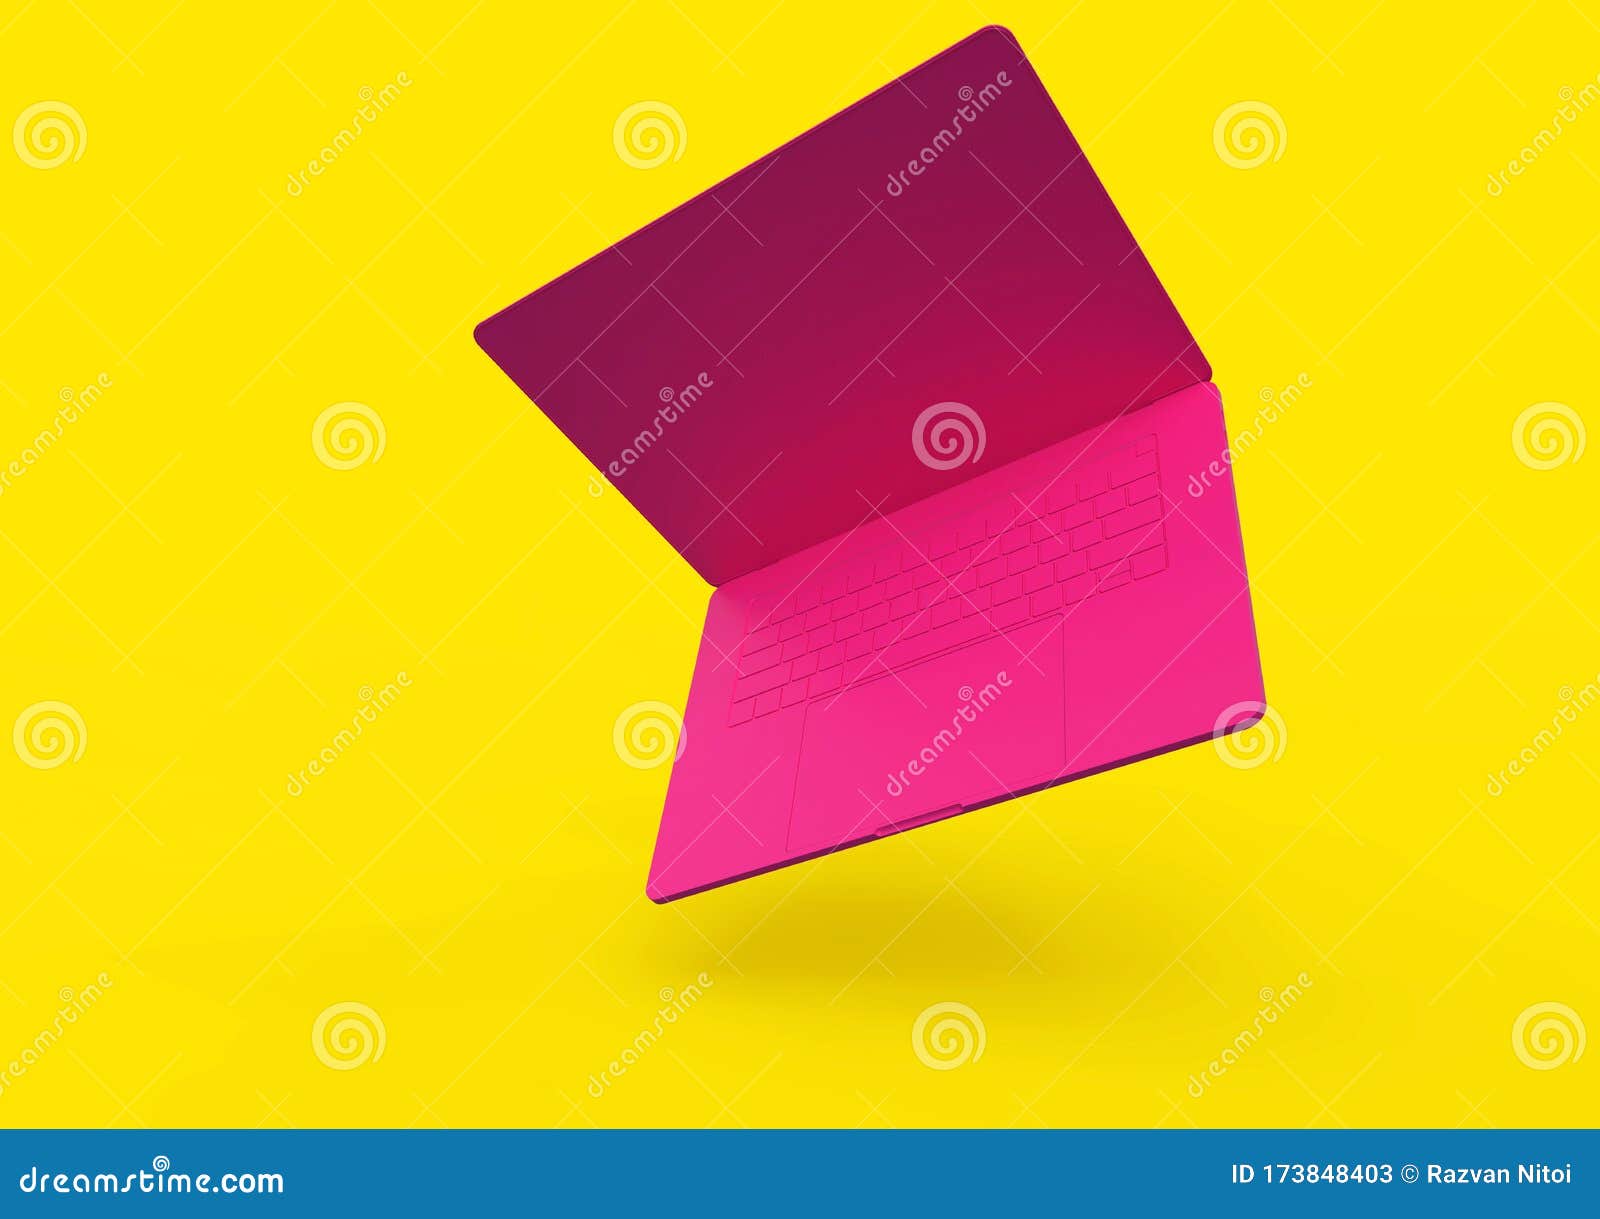 colorful laptop computer floating on colorful background